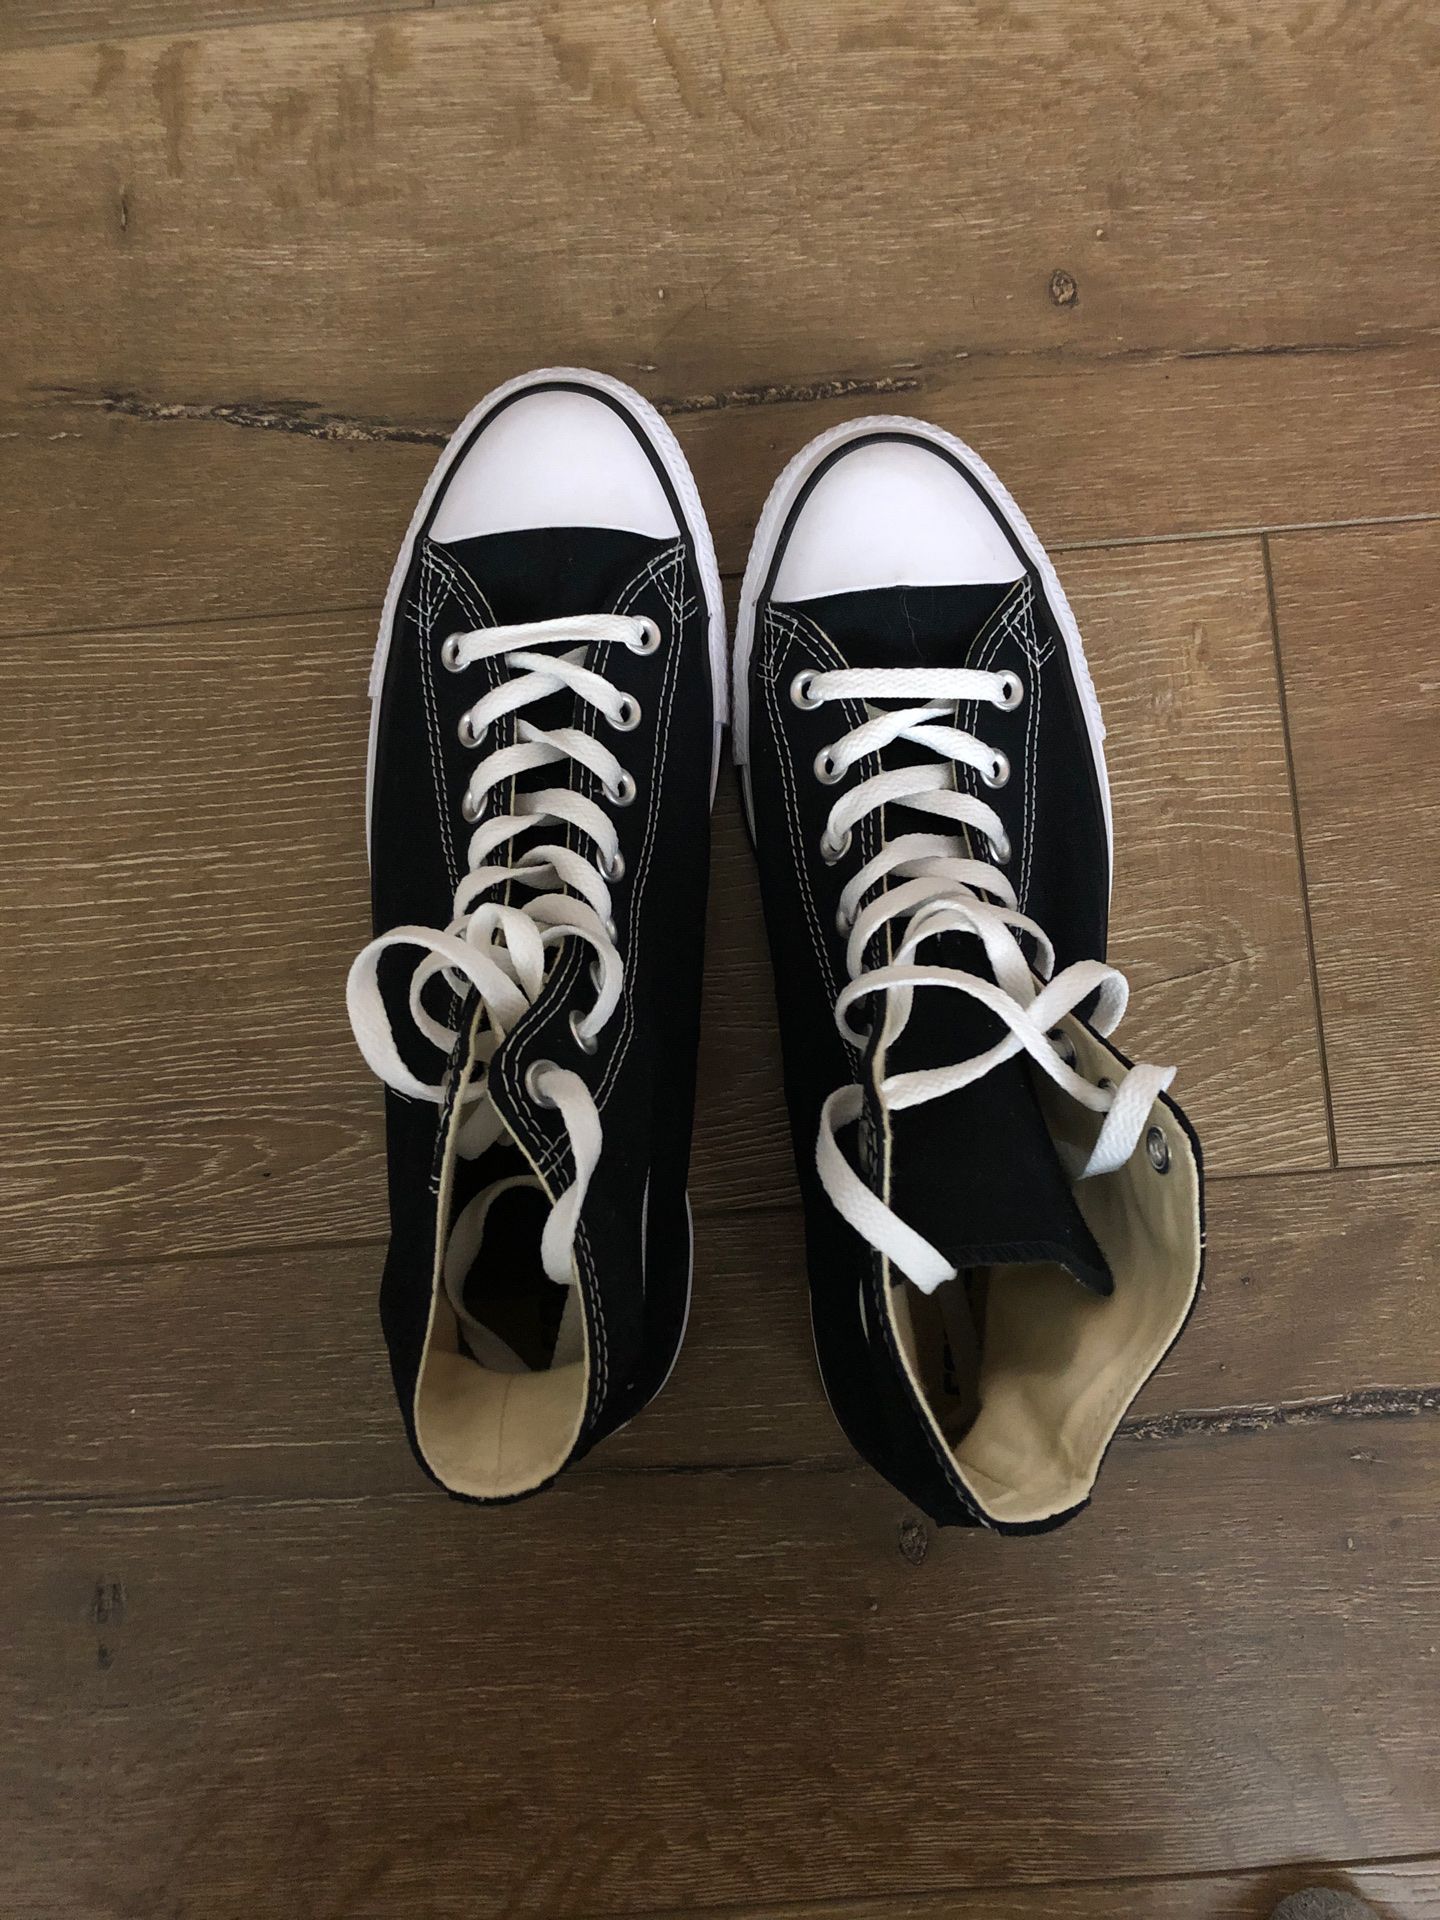 Converse all star shoes mint condition